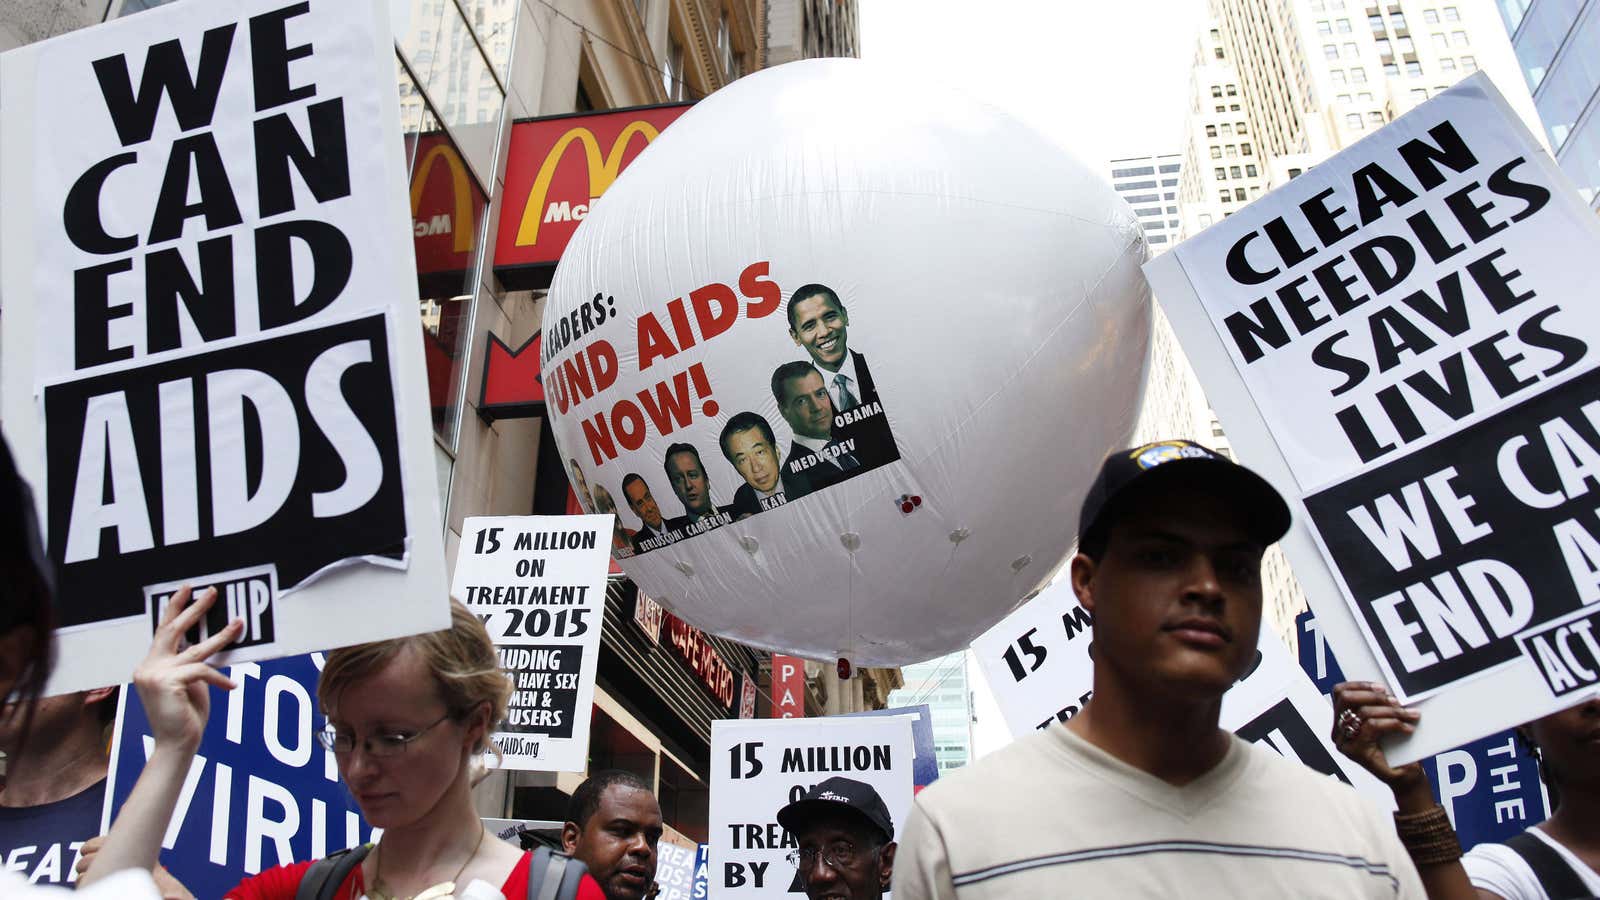 PrEP might just have a chance of ending AIDS—but it’s hugely divisive.